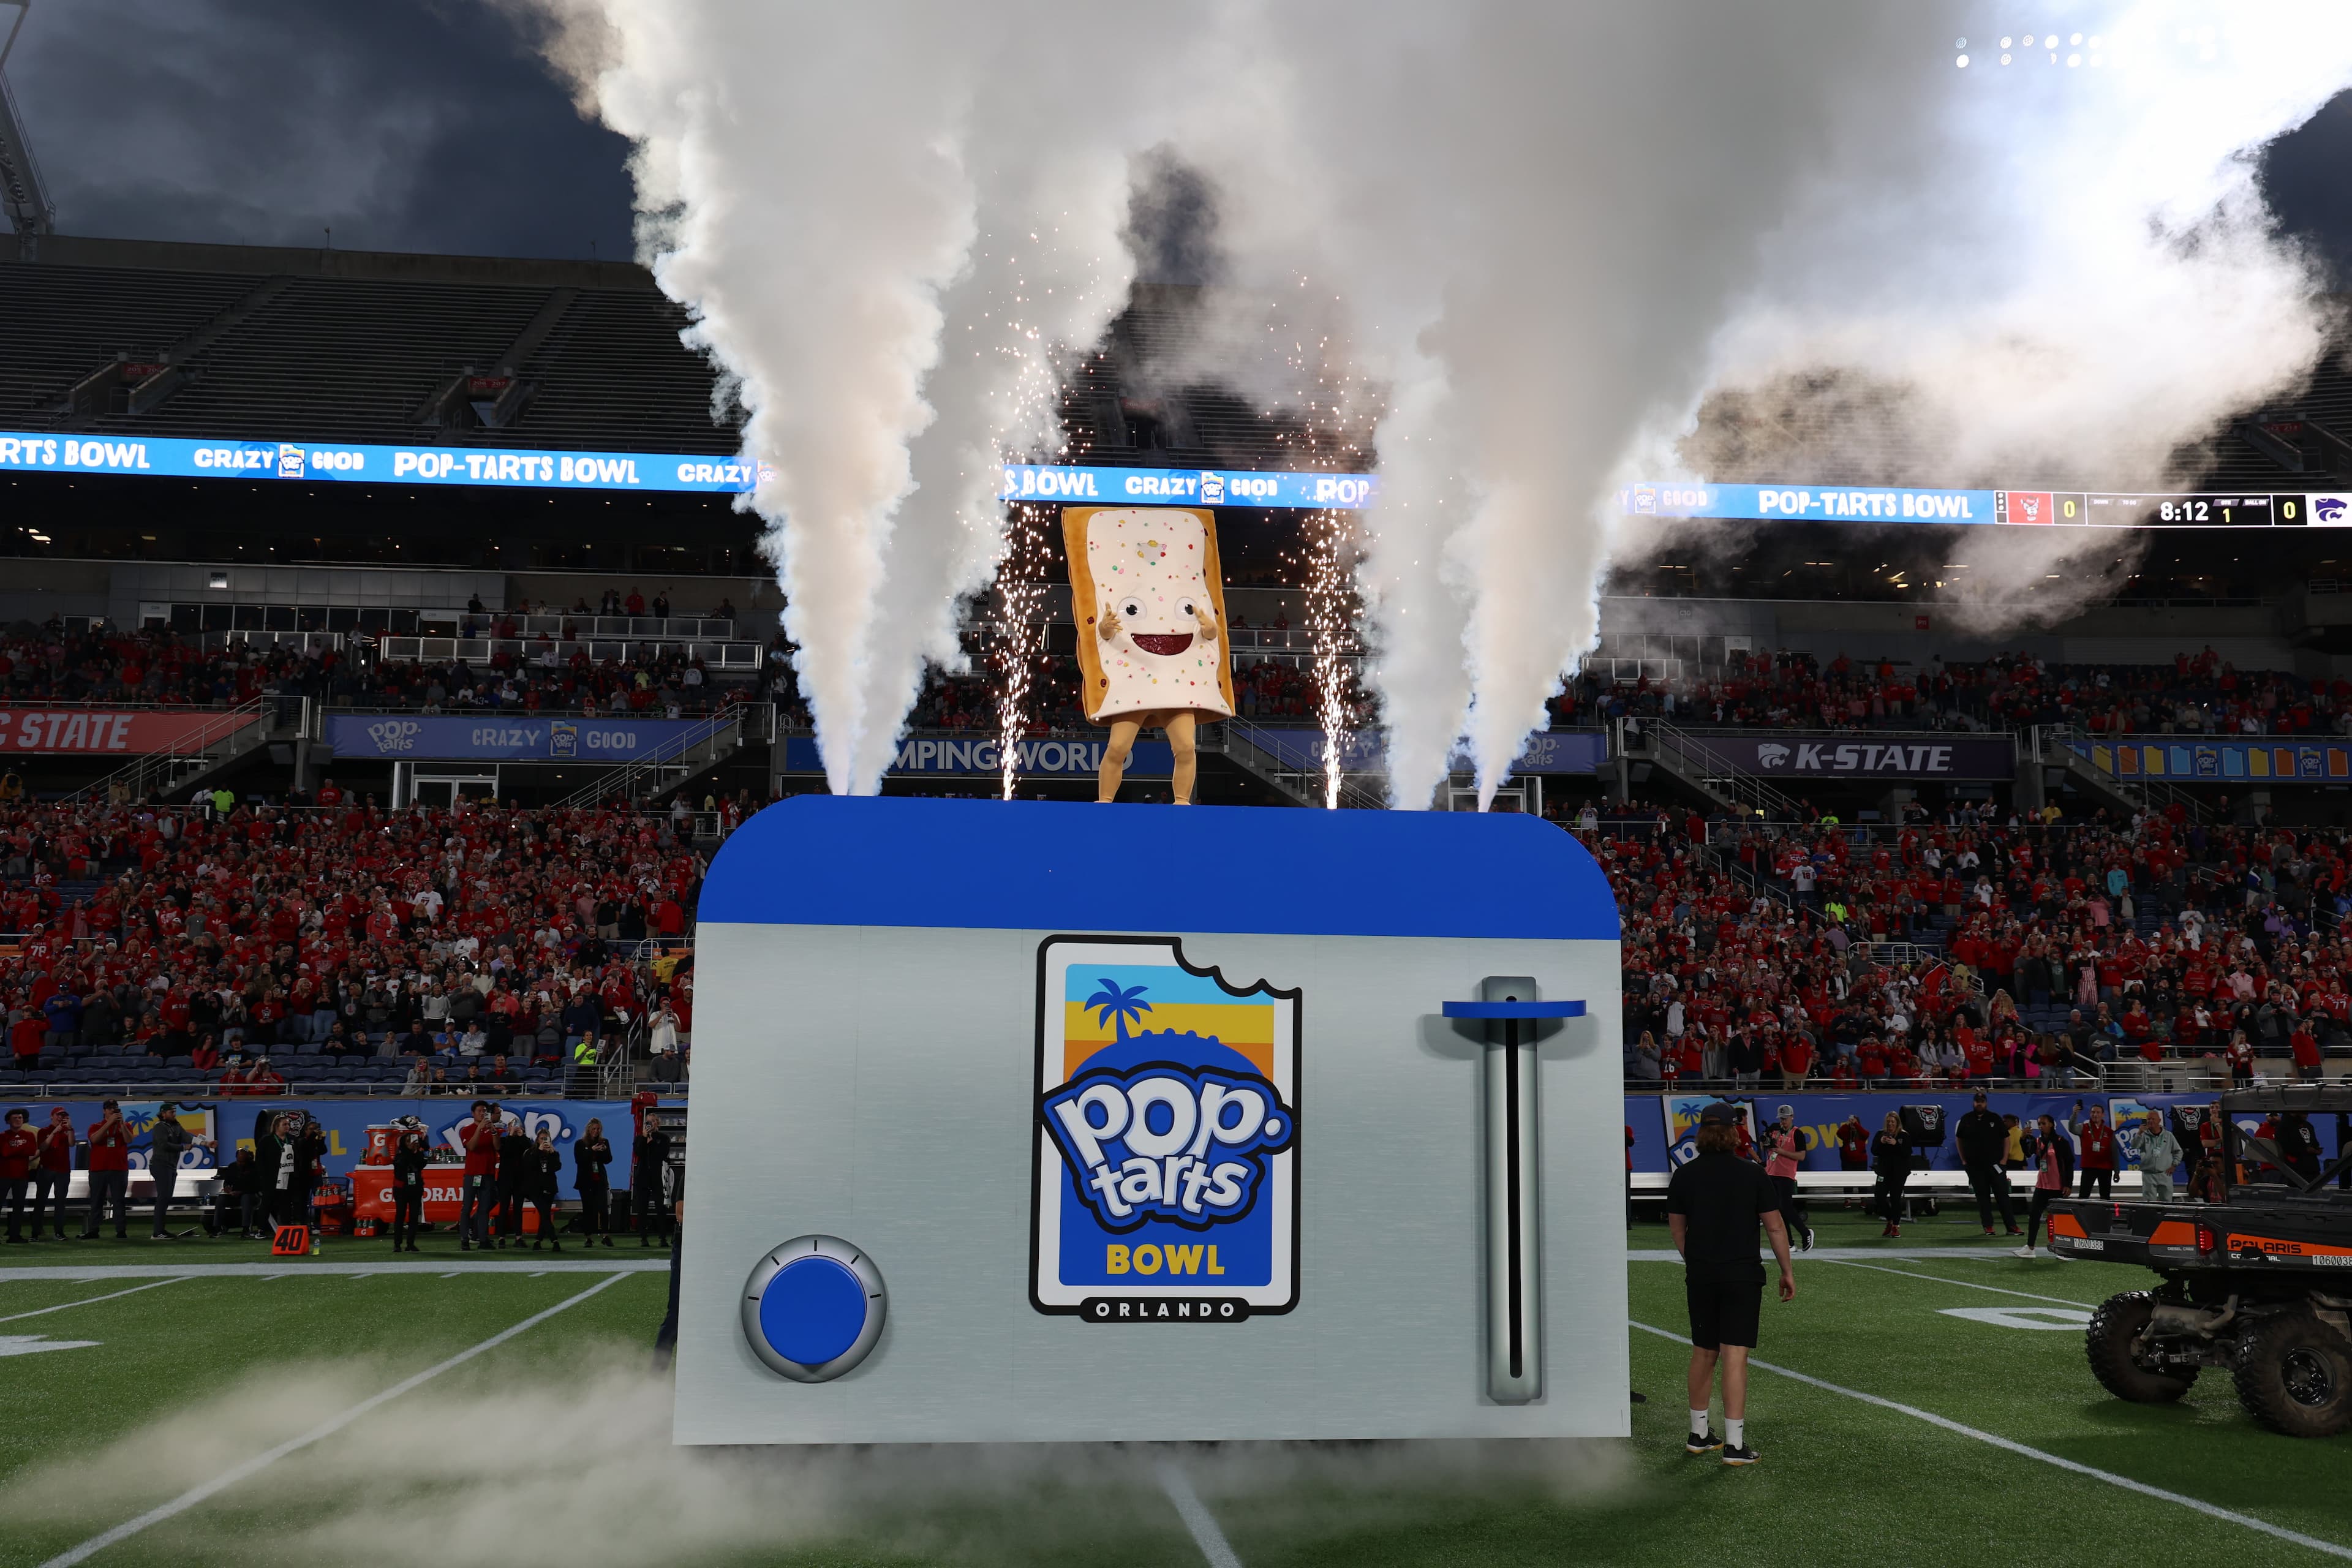 The Pop-Tarts mascot stands on top of a giant Pop-Tart branded toaster oven with smoke coming out to either side of them and a full stadium of people around them